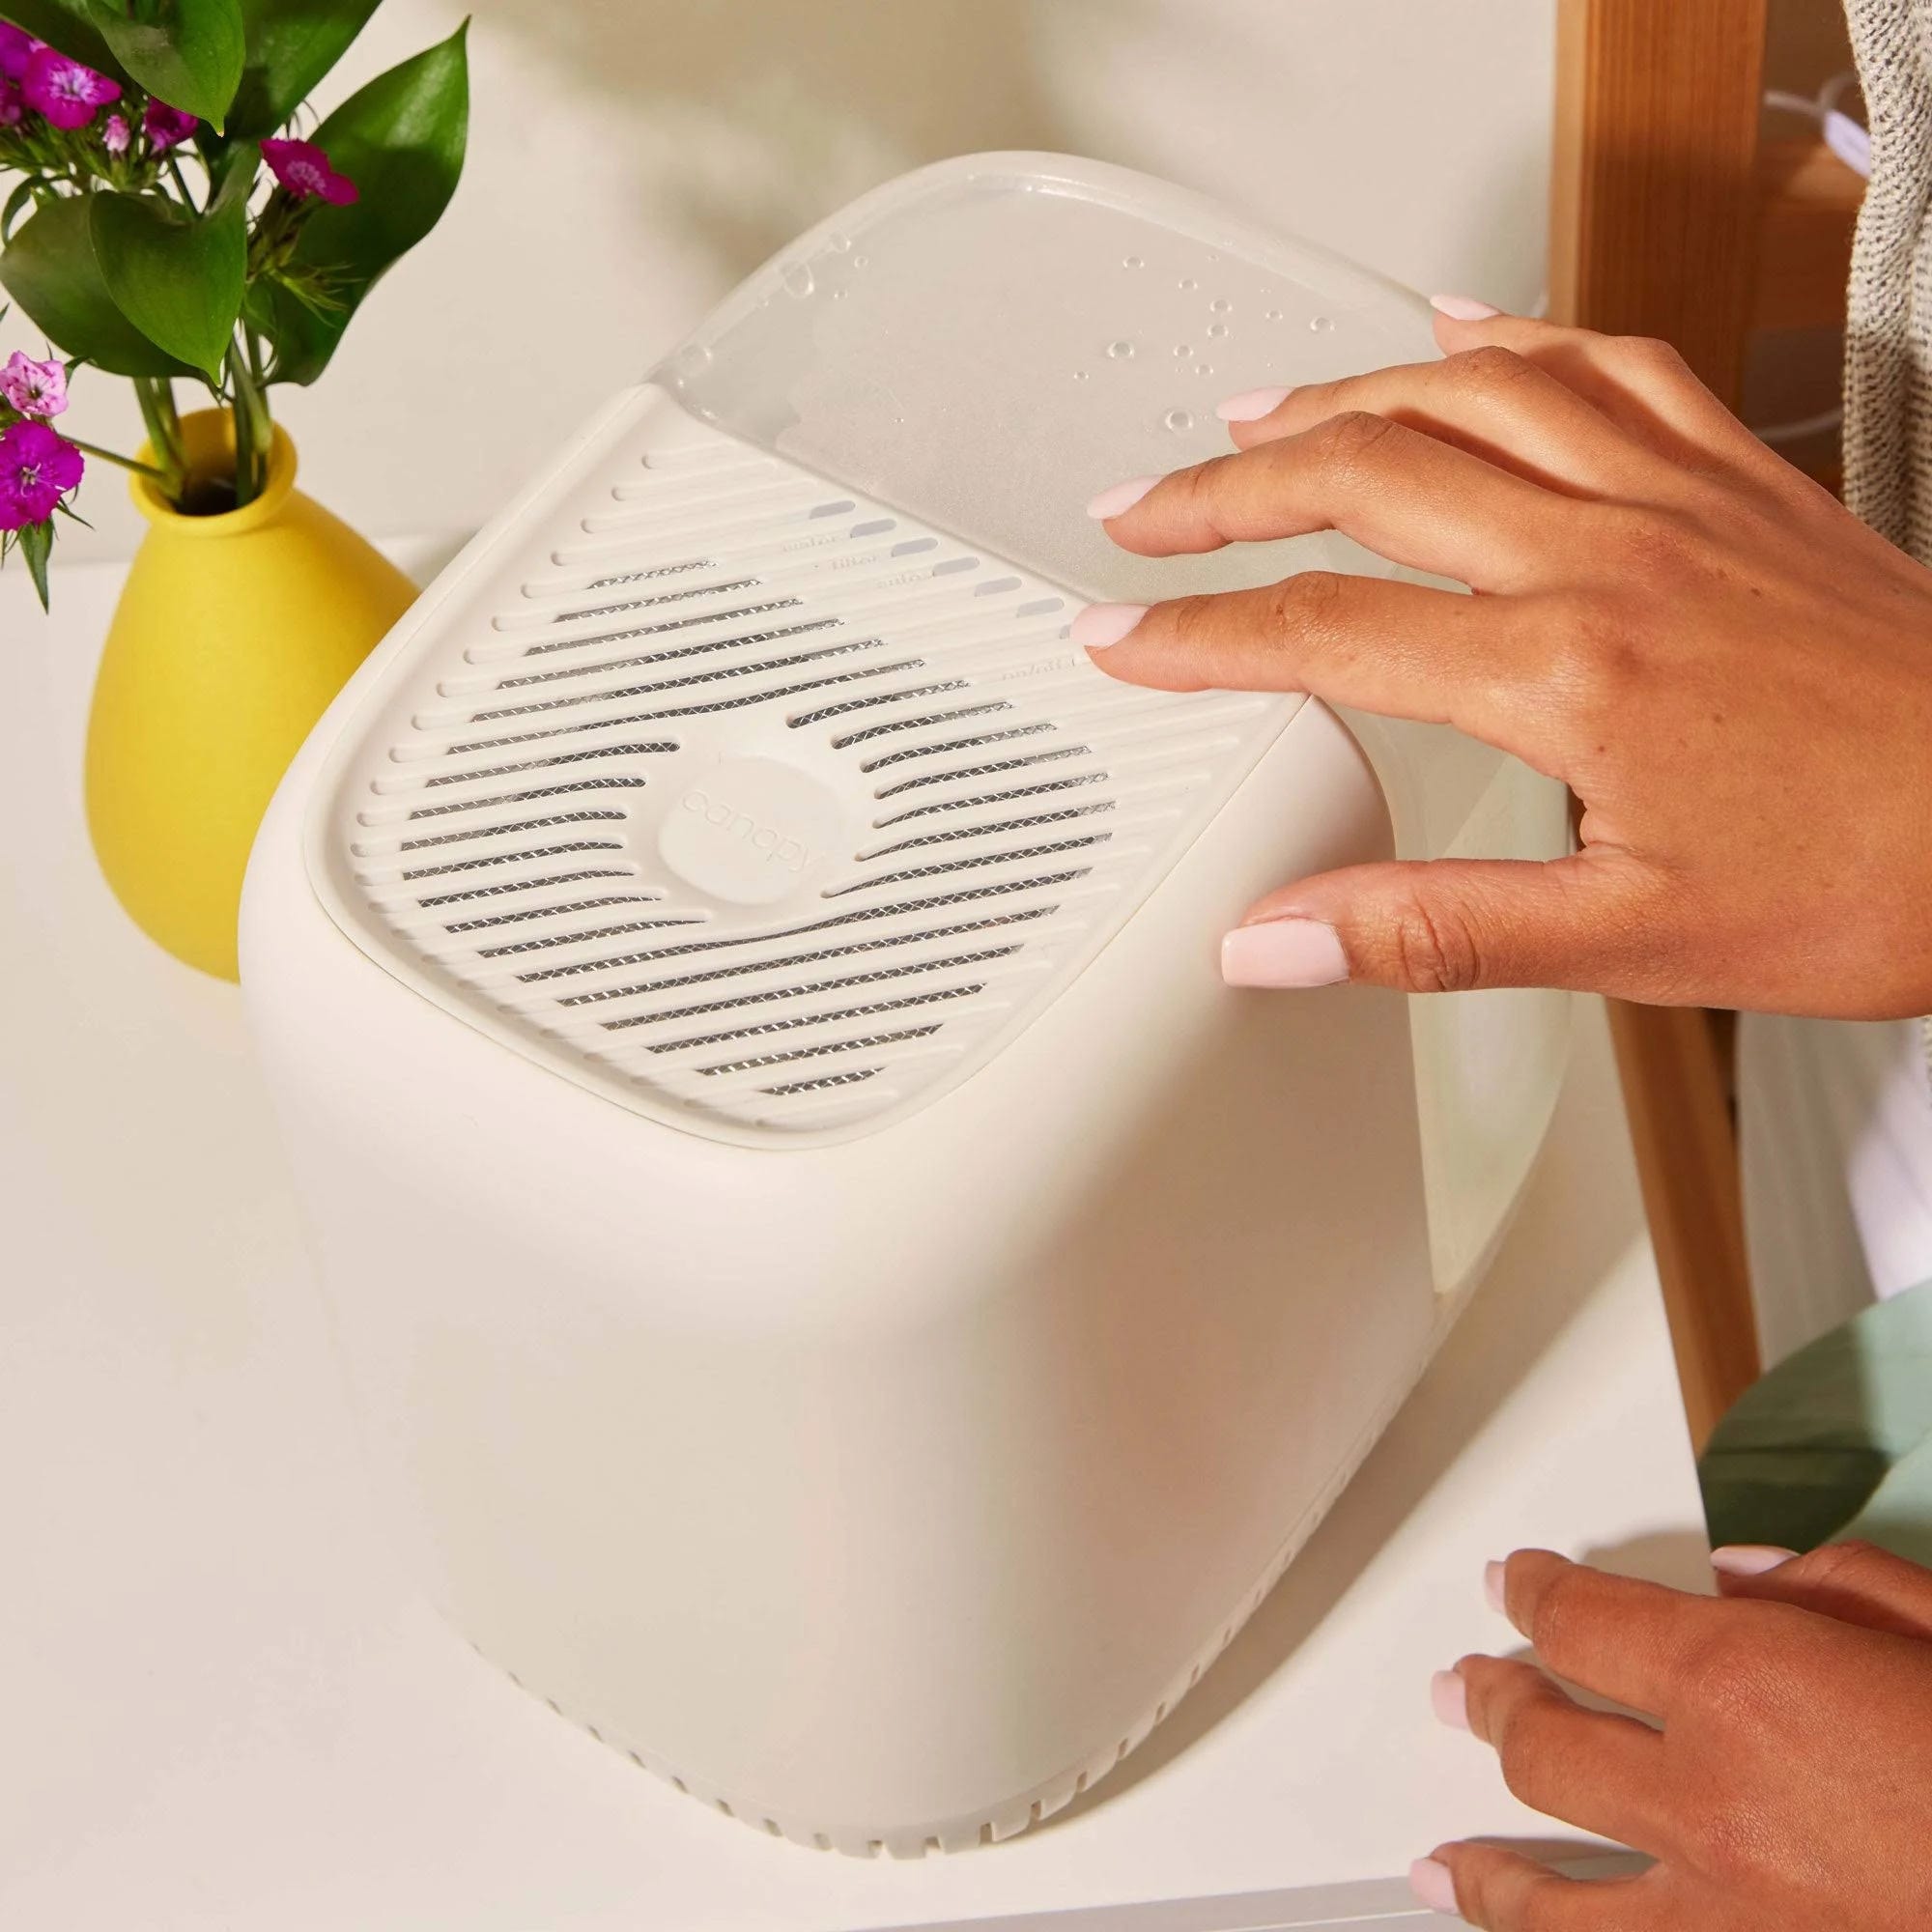 Canopy Humidifier: Sleek & Compact for Hydrated Skin | Image